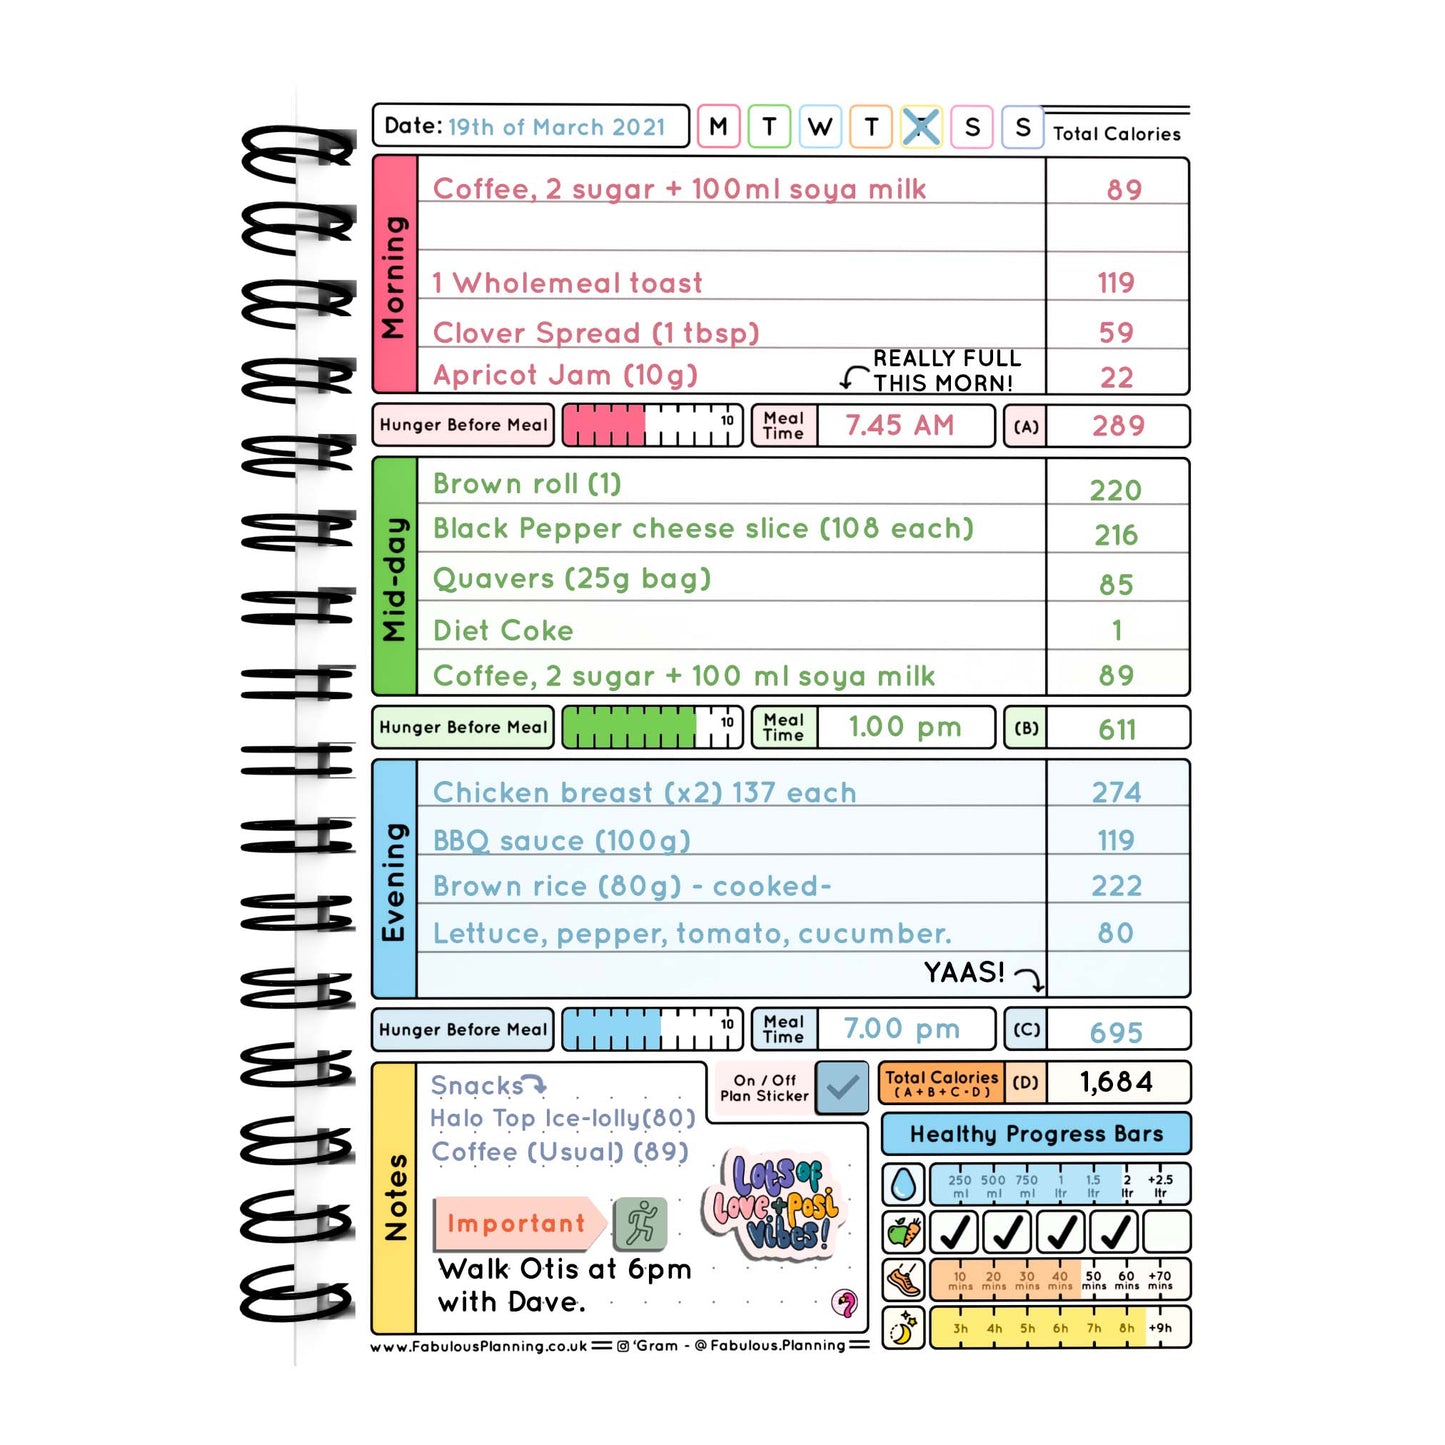 Food Diary - C67 - Calorie Counting